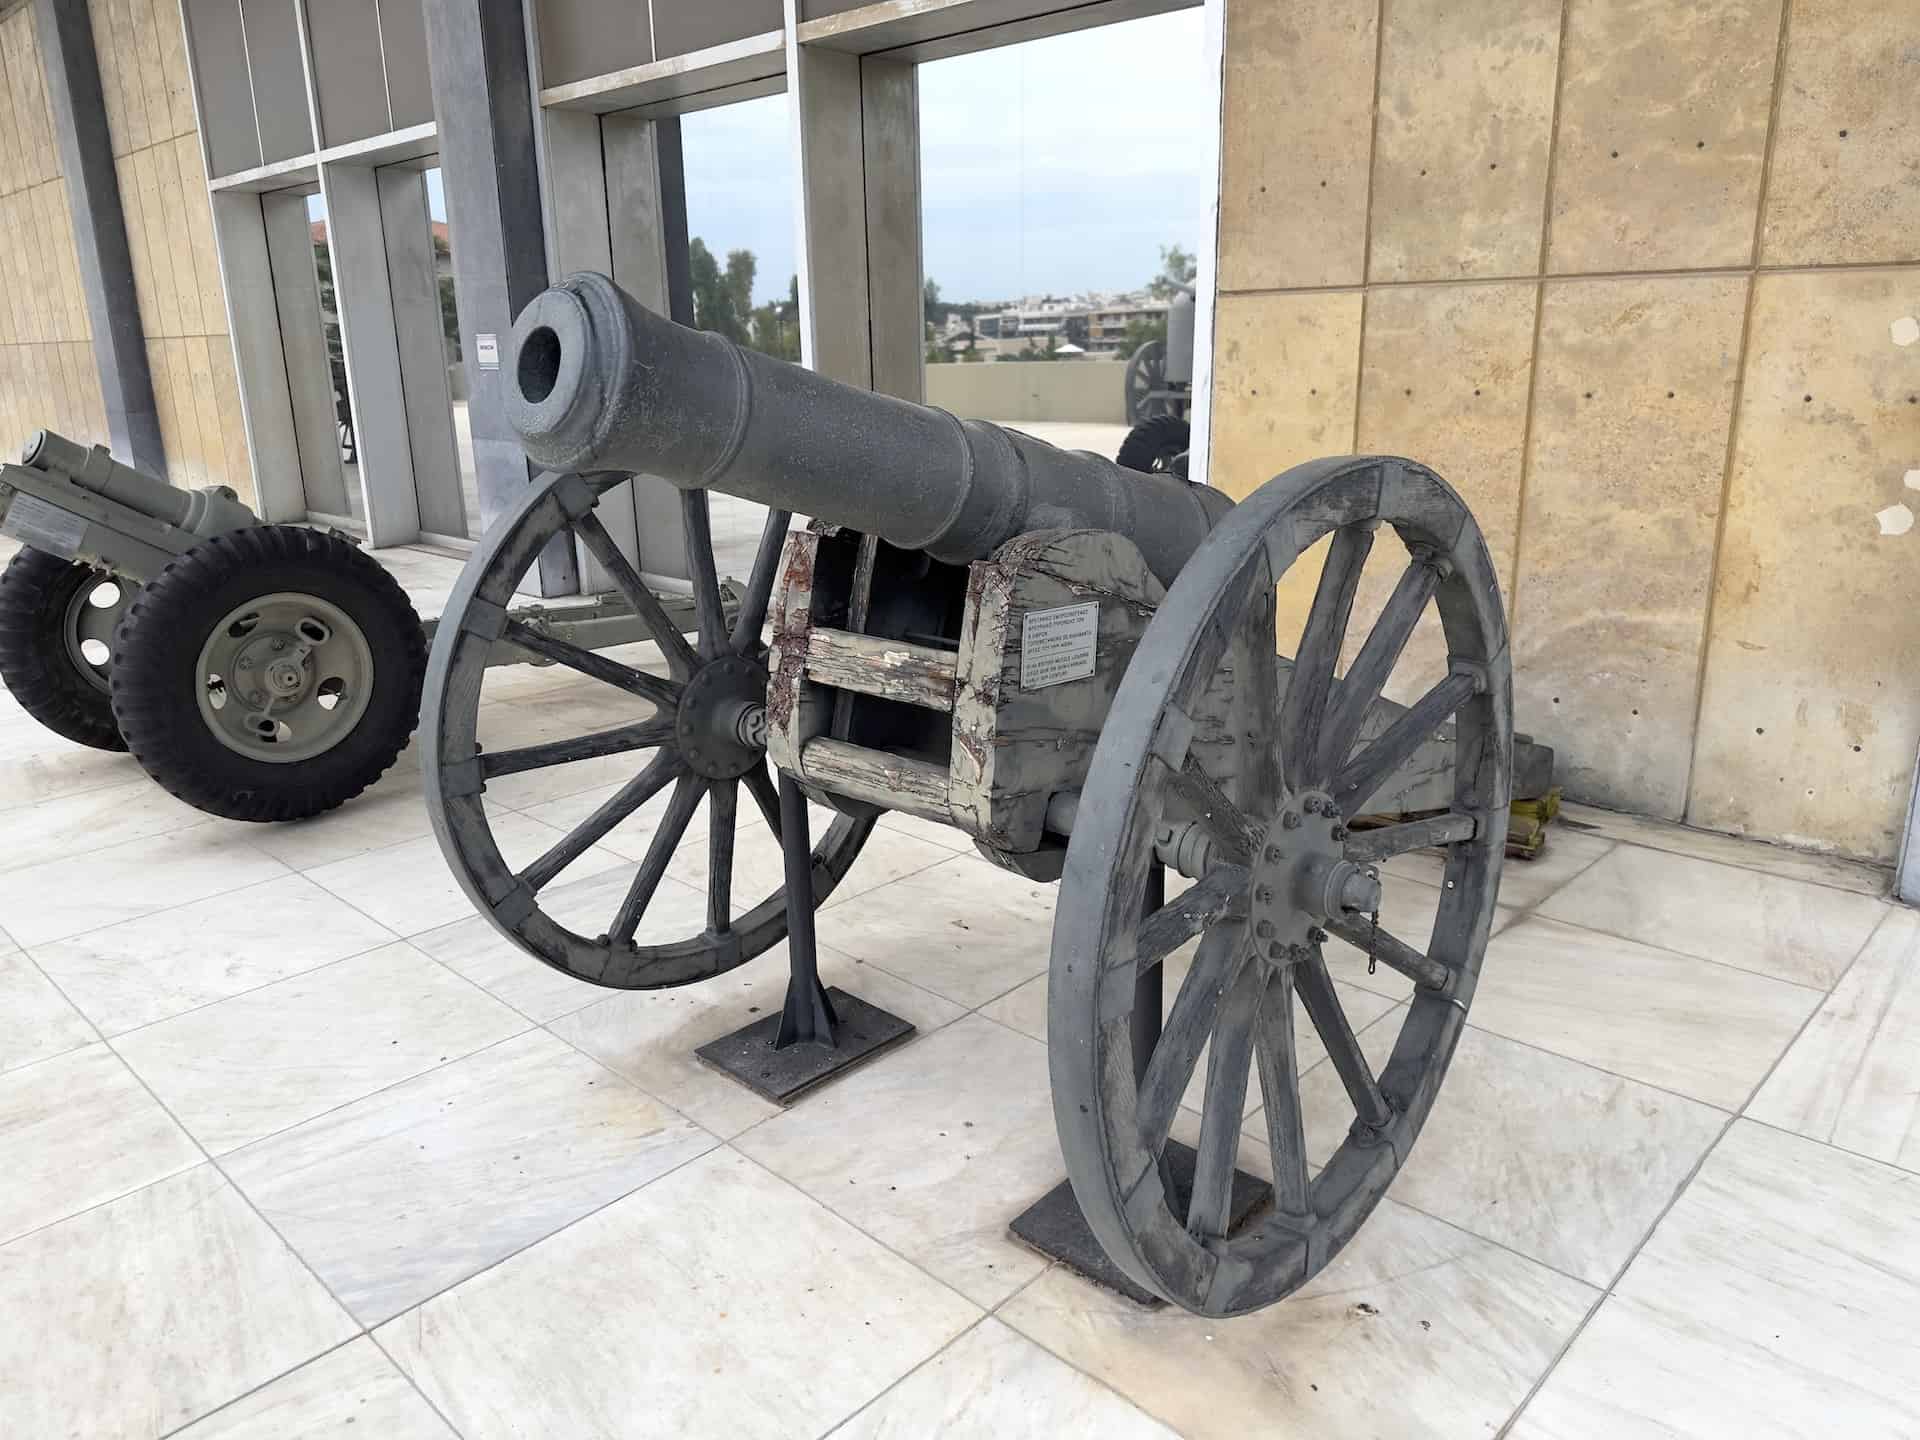 6lb British muzzle loading siege gun on gun carriage, early 19th century at the War Museum in Athens, Greece